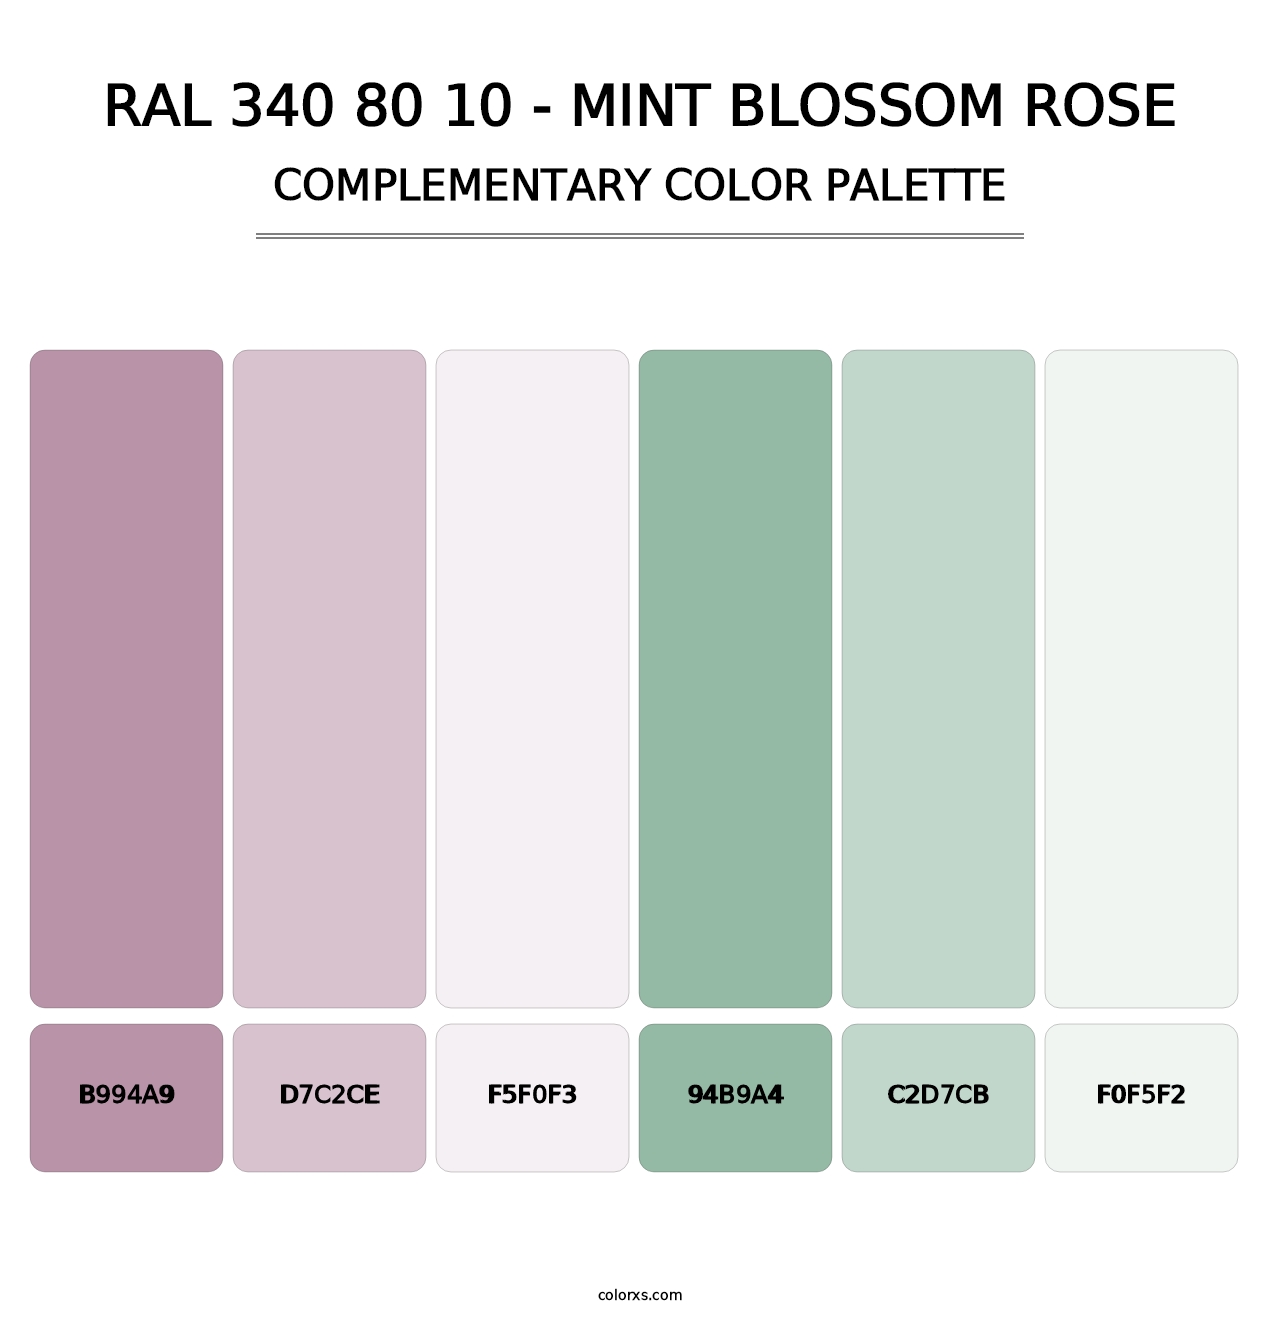 RAL 340 80 10 - Mint Blossom Rose - Complementary Color Palette